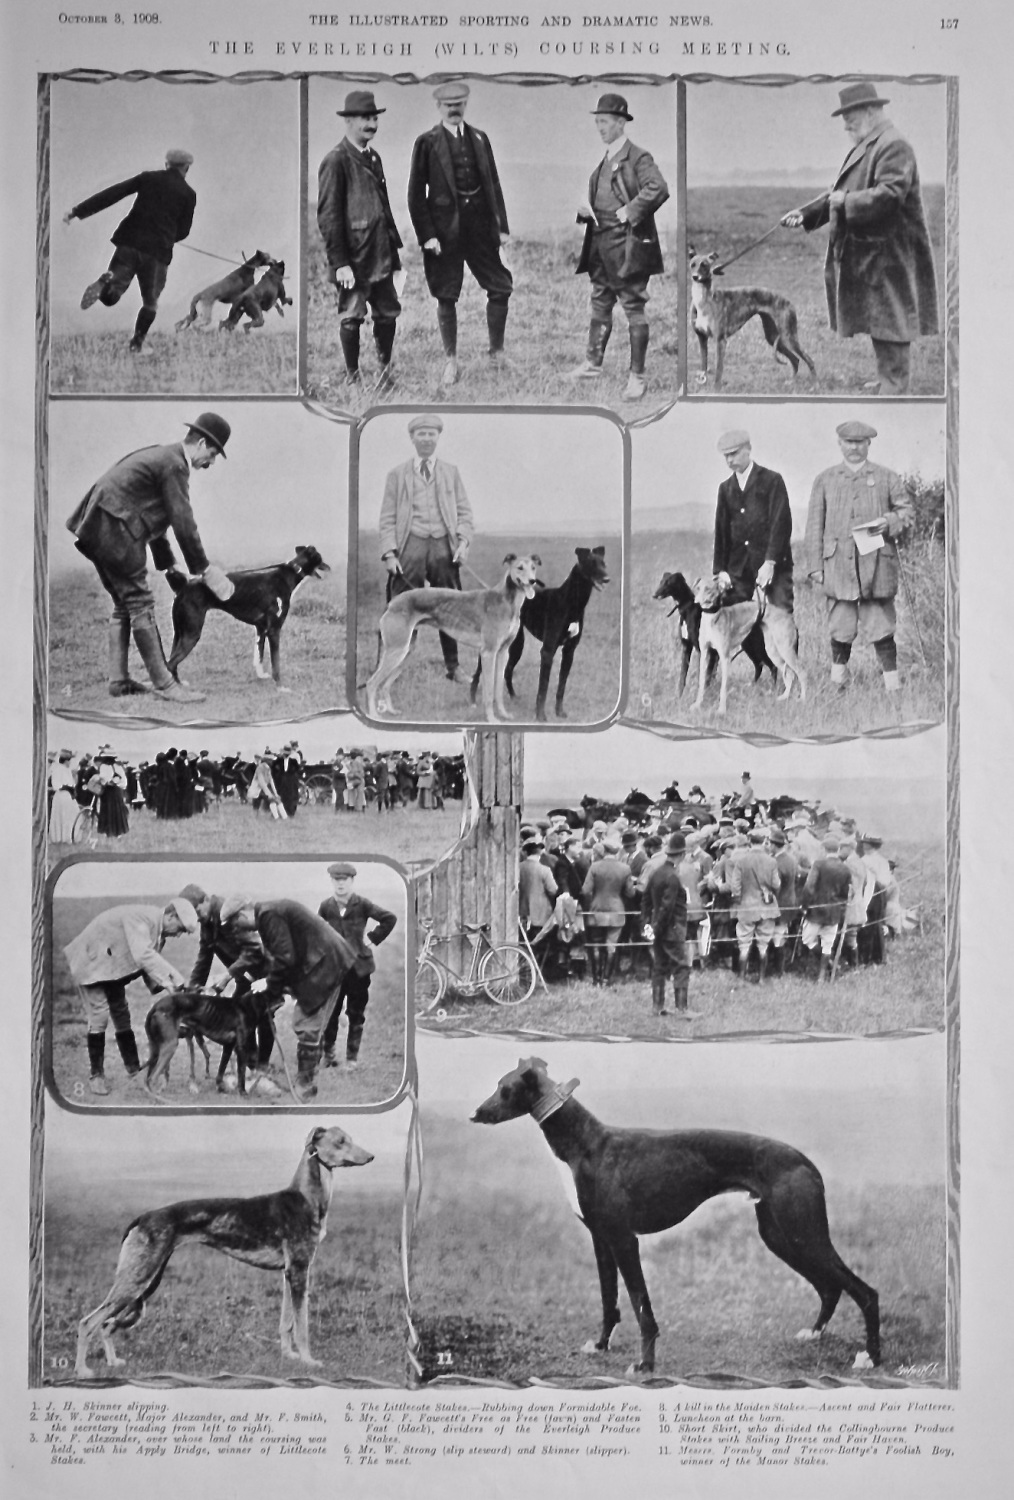 The Everleigh (Wilts) Coursing Meeting.  1908.